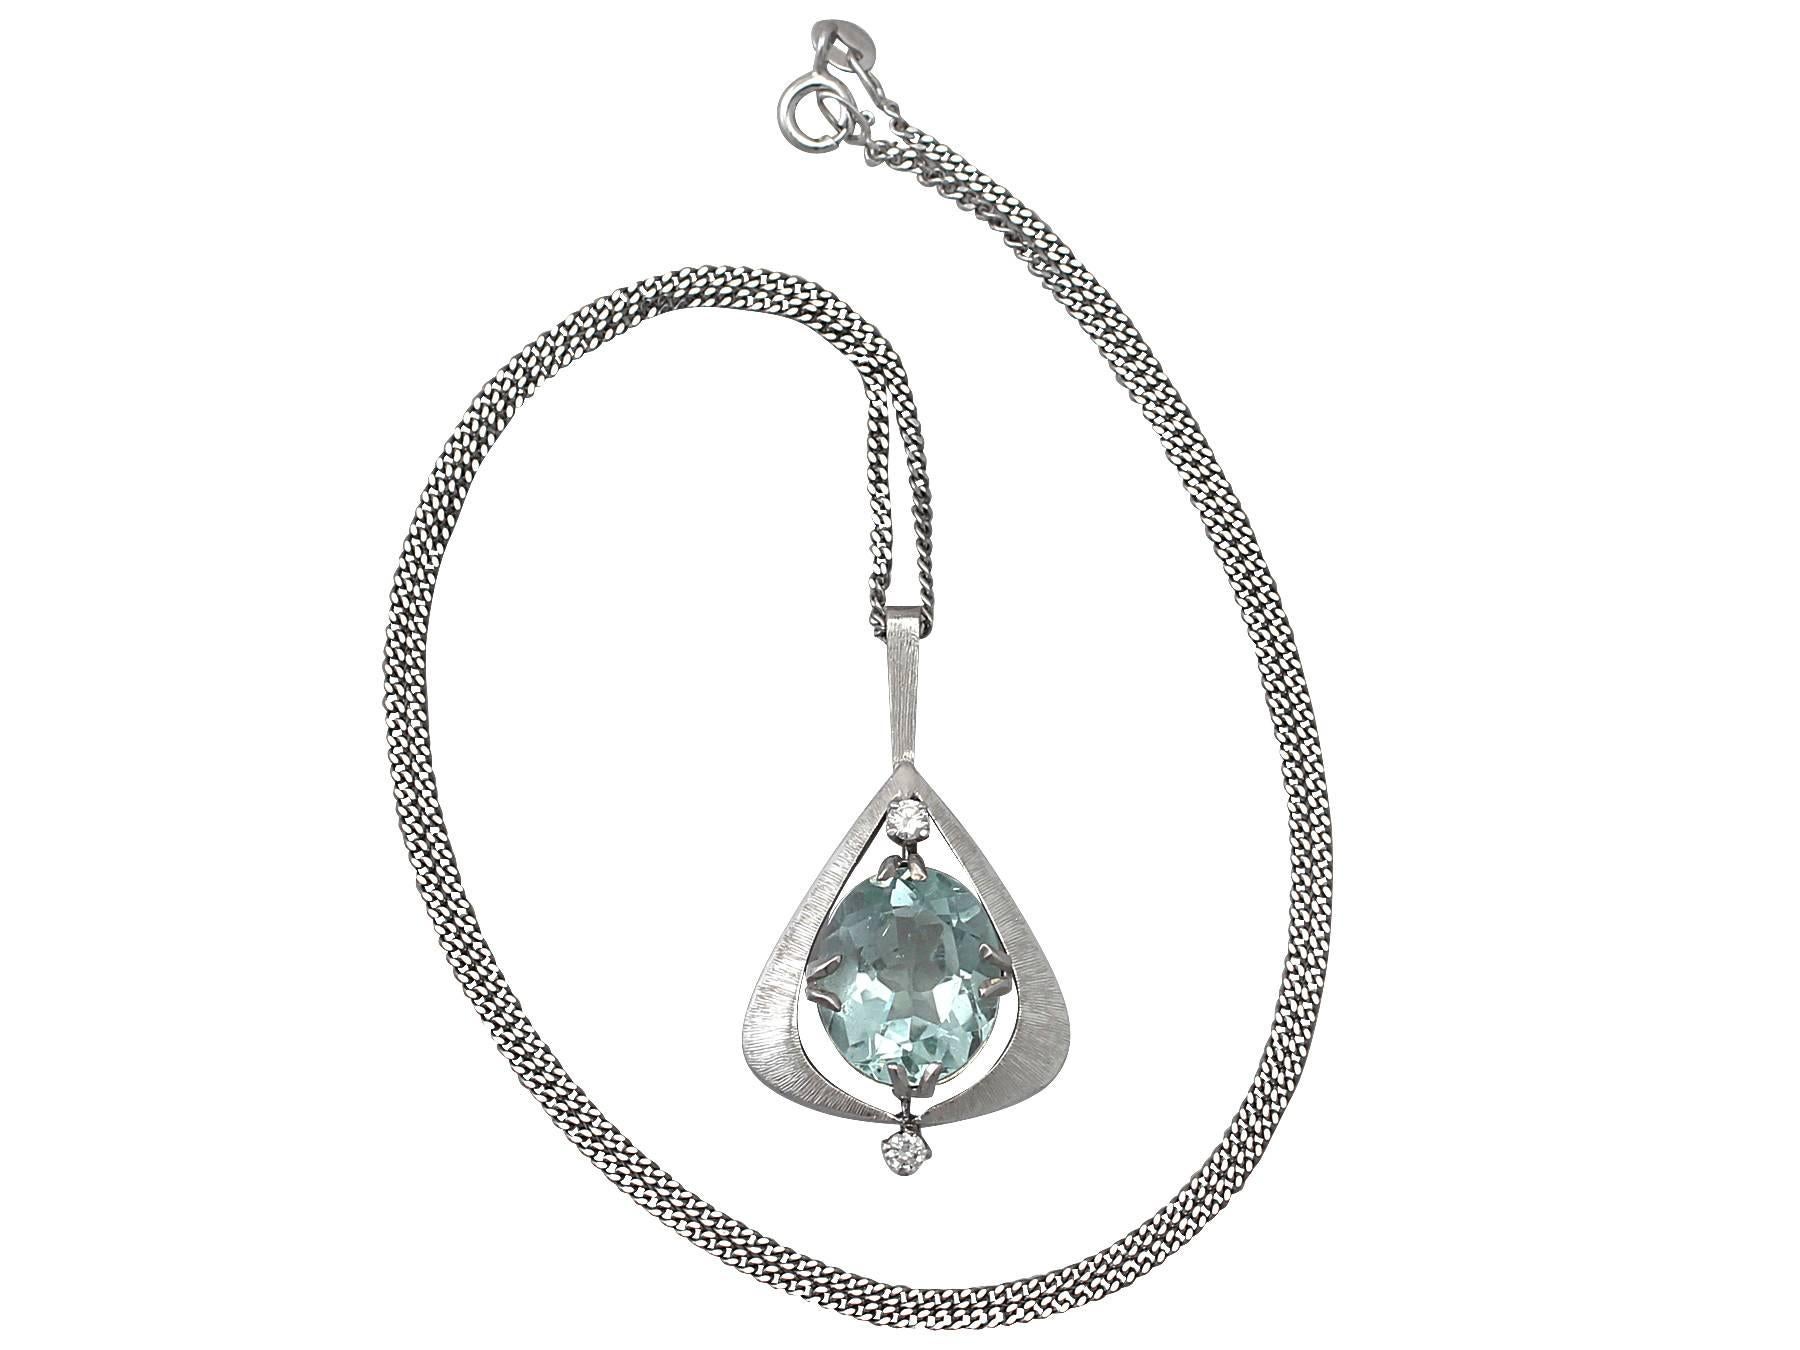 A fine and impressive vintage 6.09 carat aquamarine and 0.10 carat diamond pendant in 18 karat white gold; part of our diverse gemstone jewelry and estate jewelry collections

This fine and impressive aquamarine and diamond pendant has been